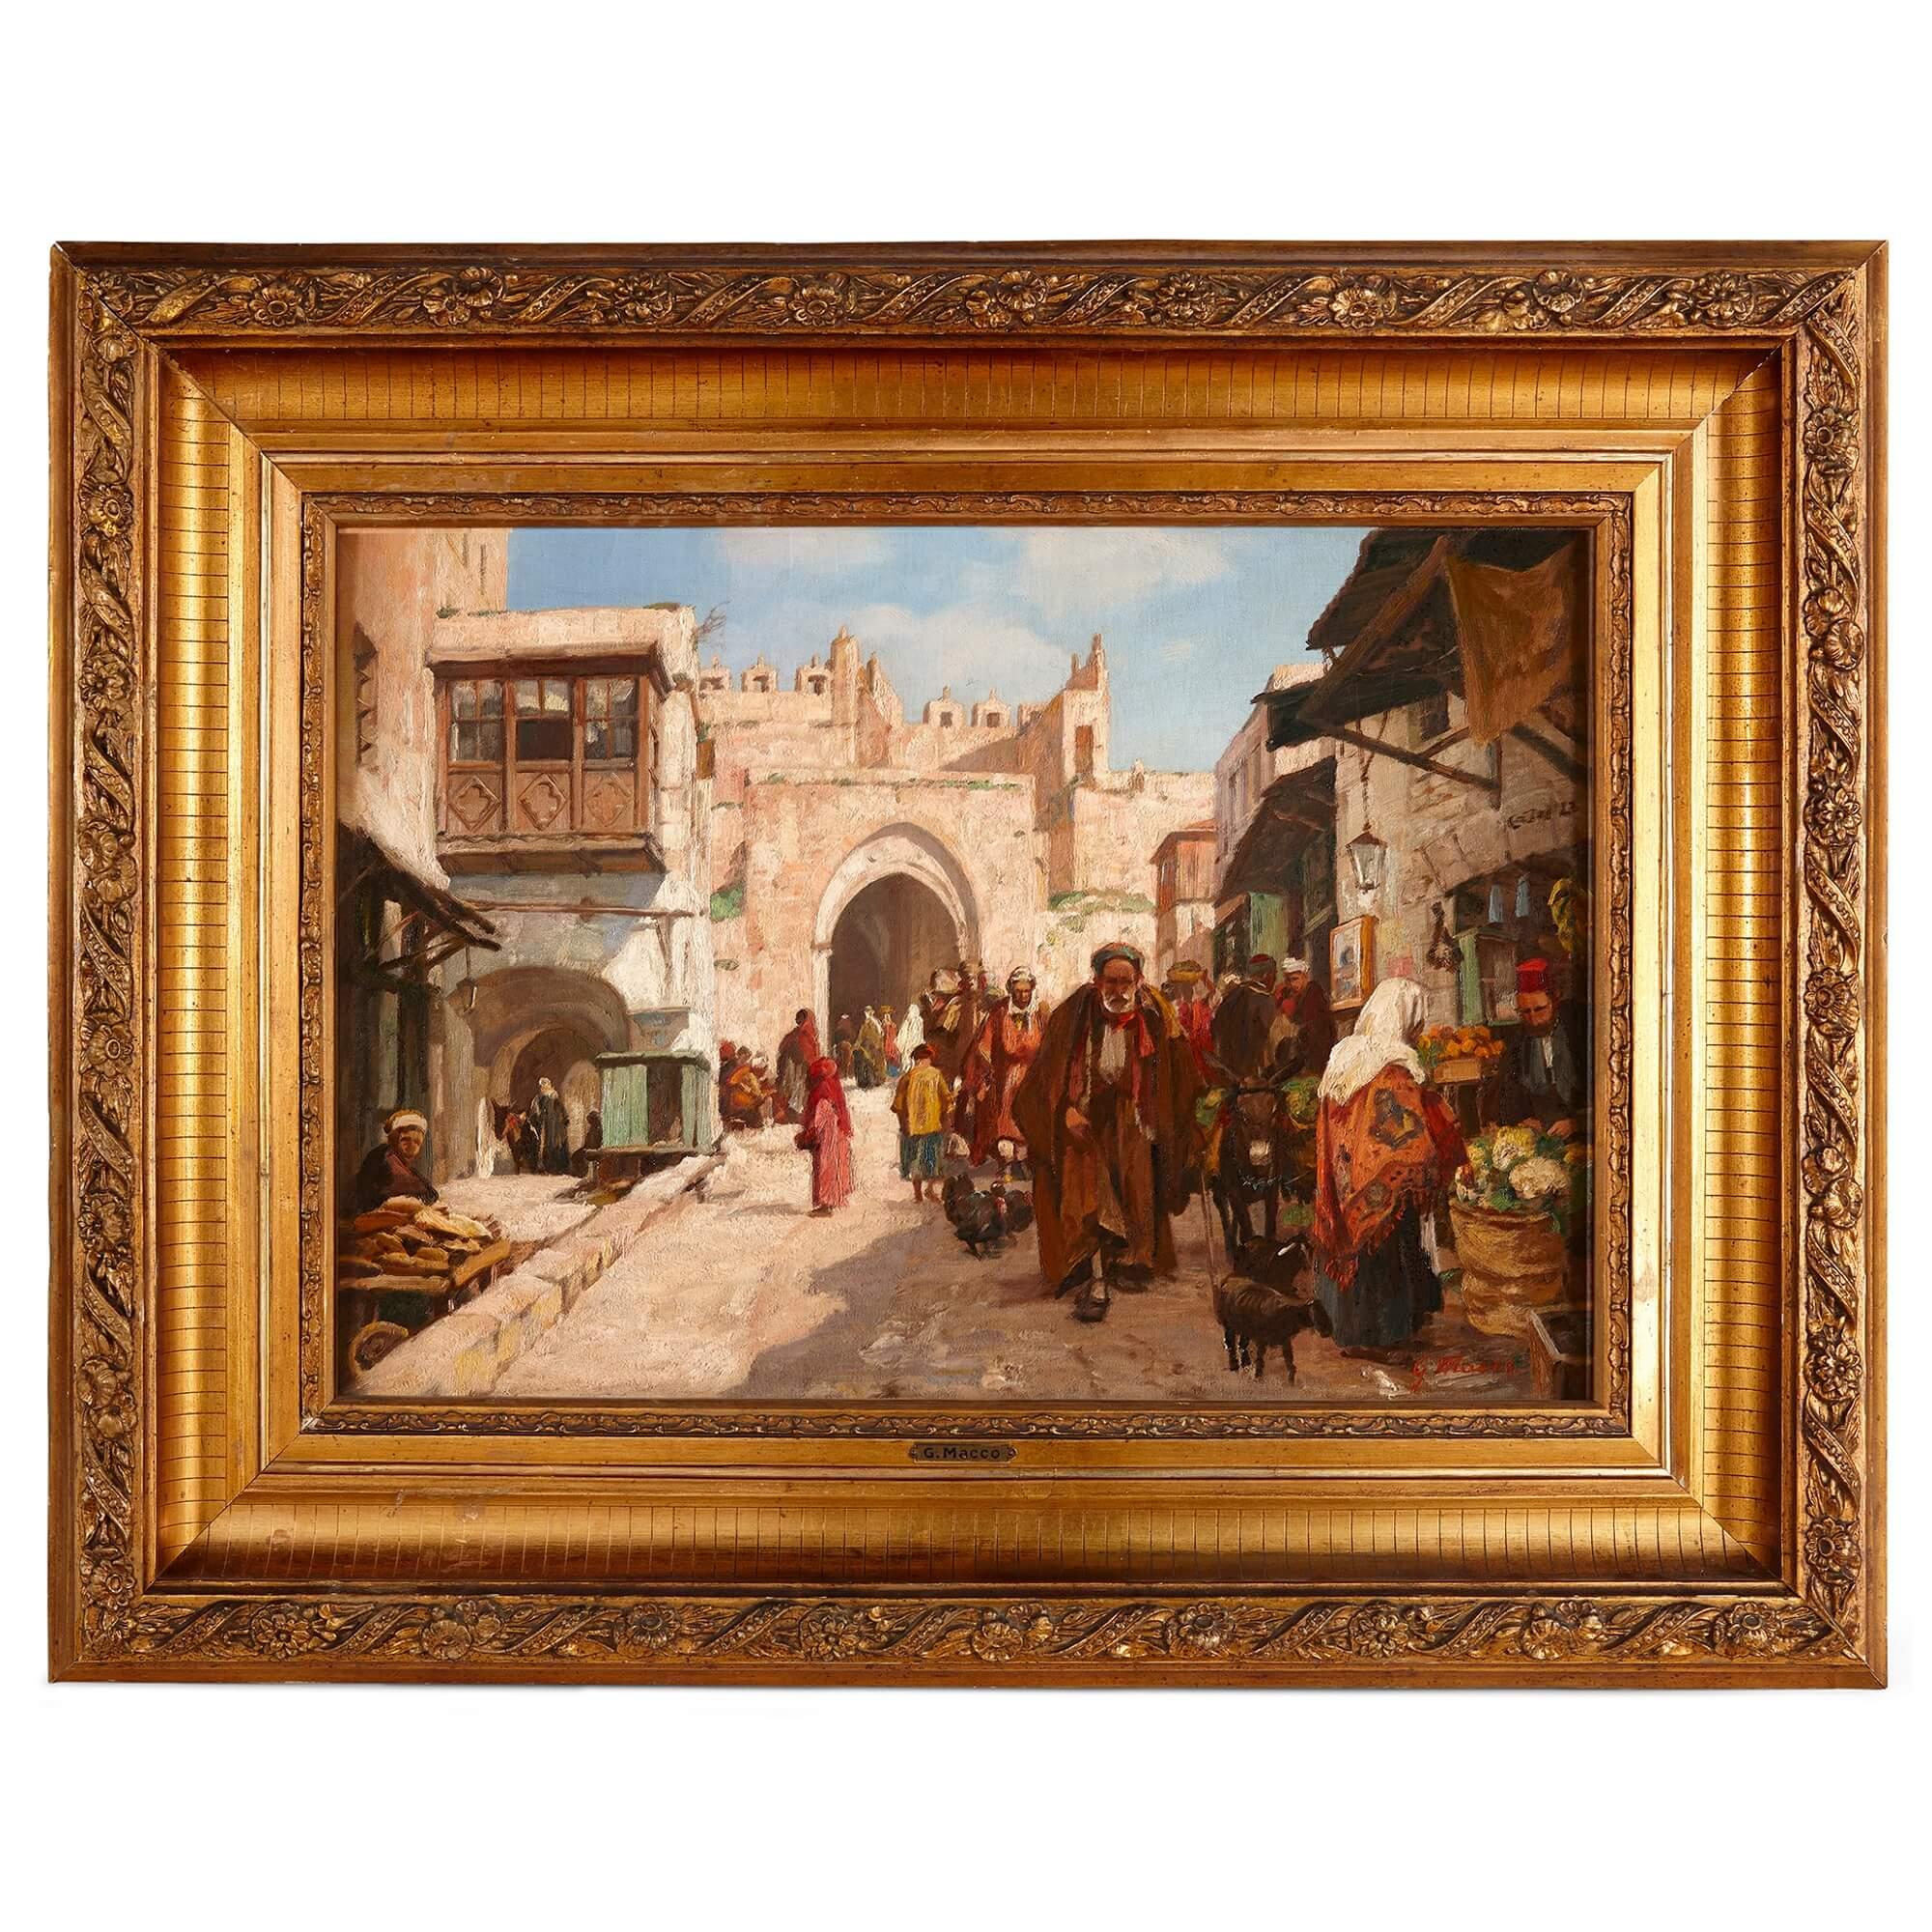  Georg Macco Landscape Painting - Orientalist Oil Painting of Damascus Gate in Jerusalem by Macco